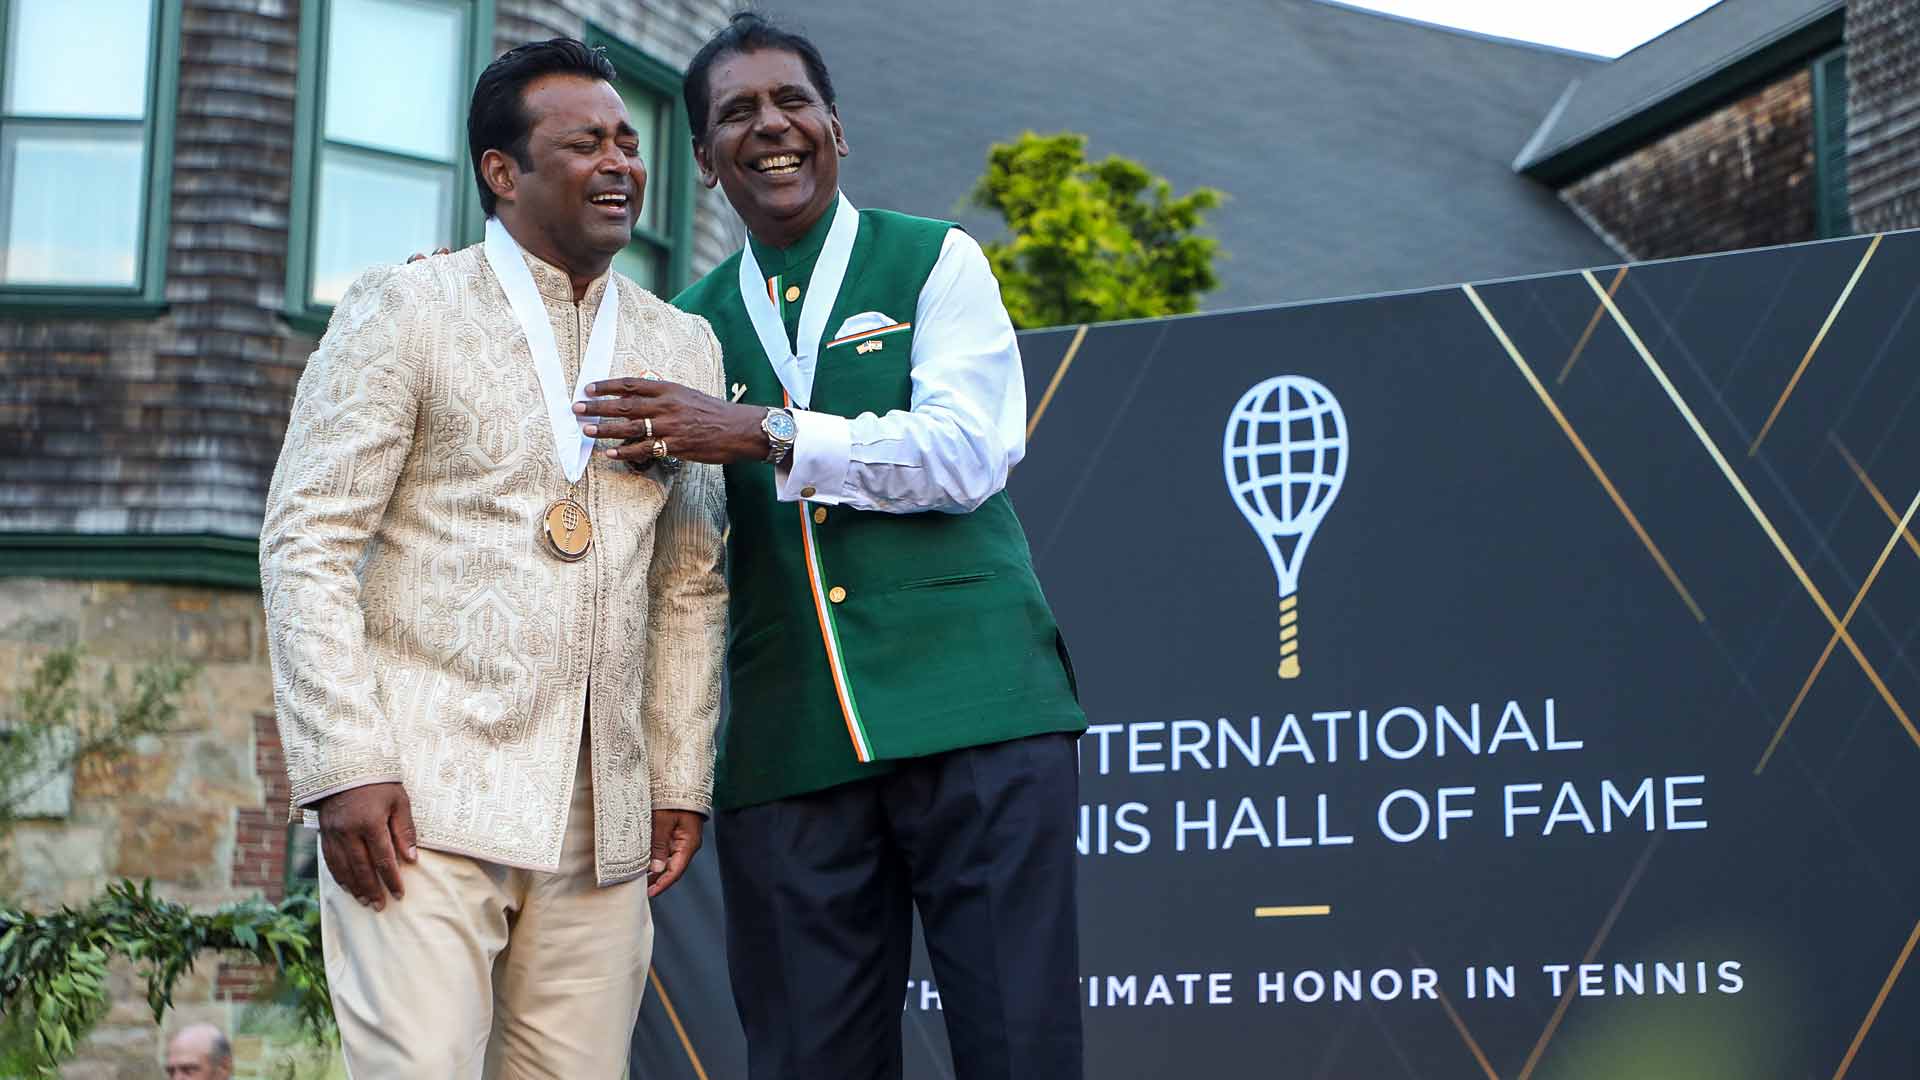 Trailblazers Amritraj, Paes make Indian history with Hall of Fame induction